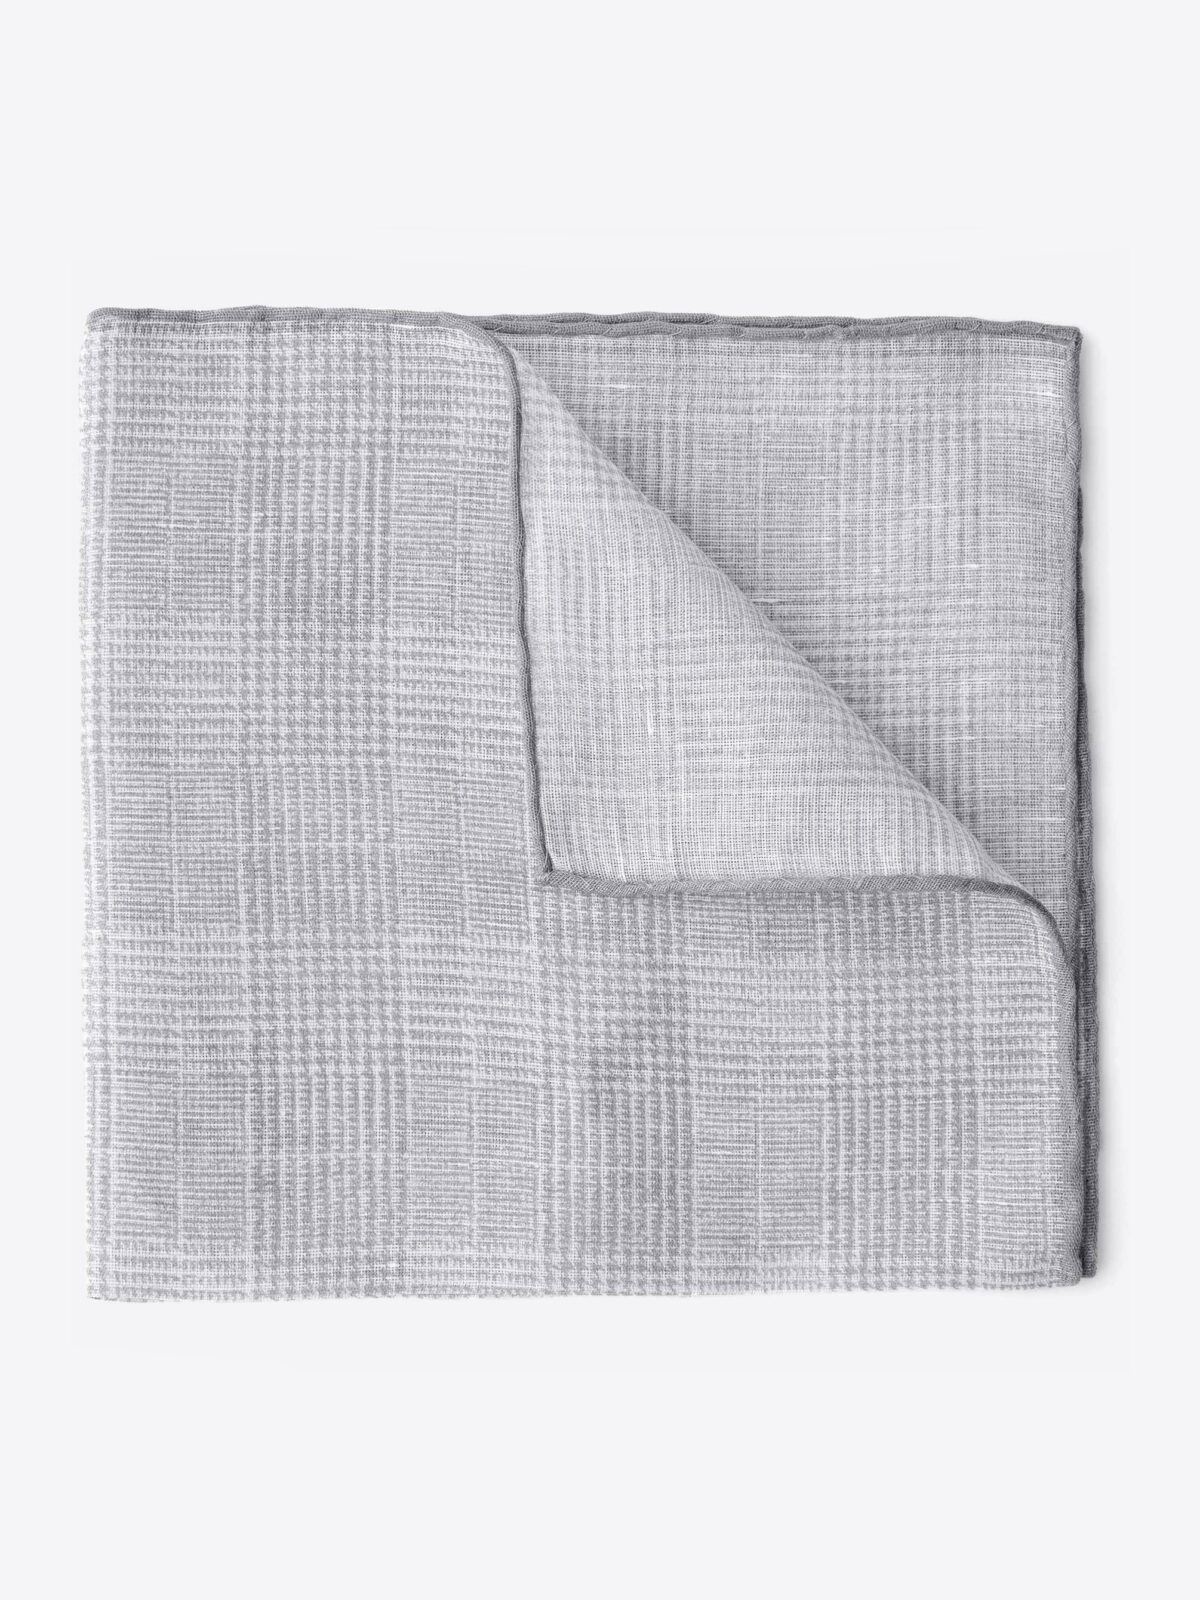 Grey Tipped Glen Plaid Cotton and Linen Pocket Square